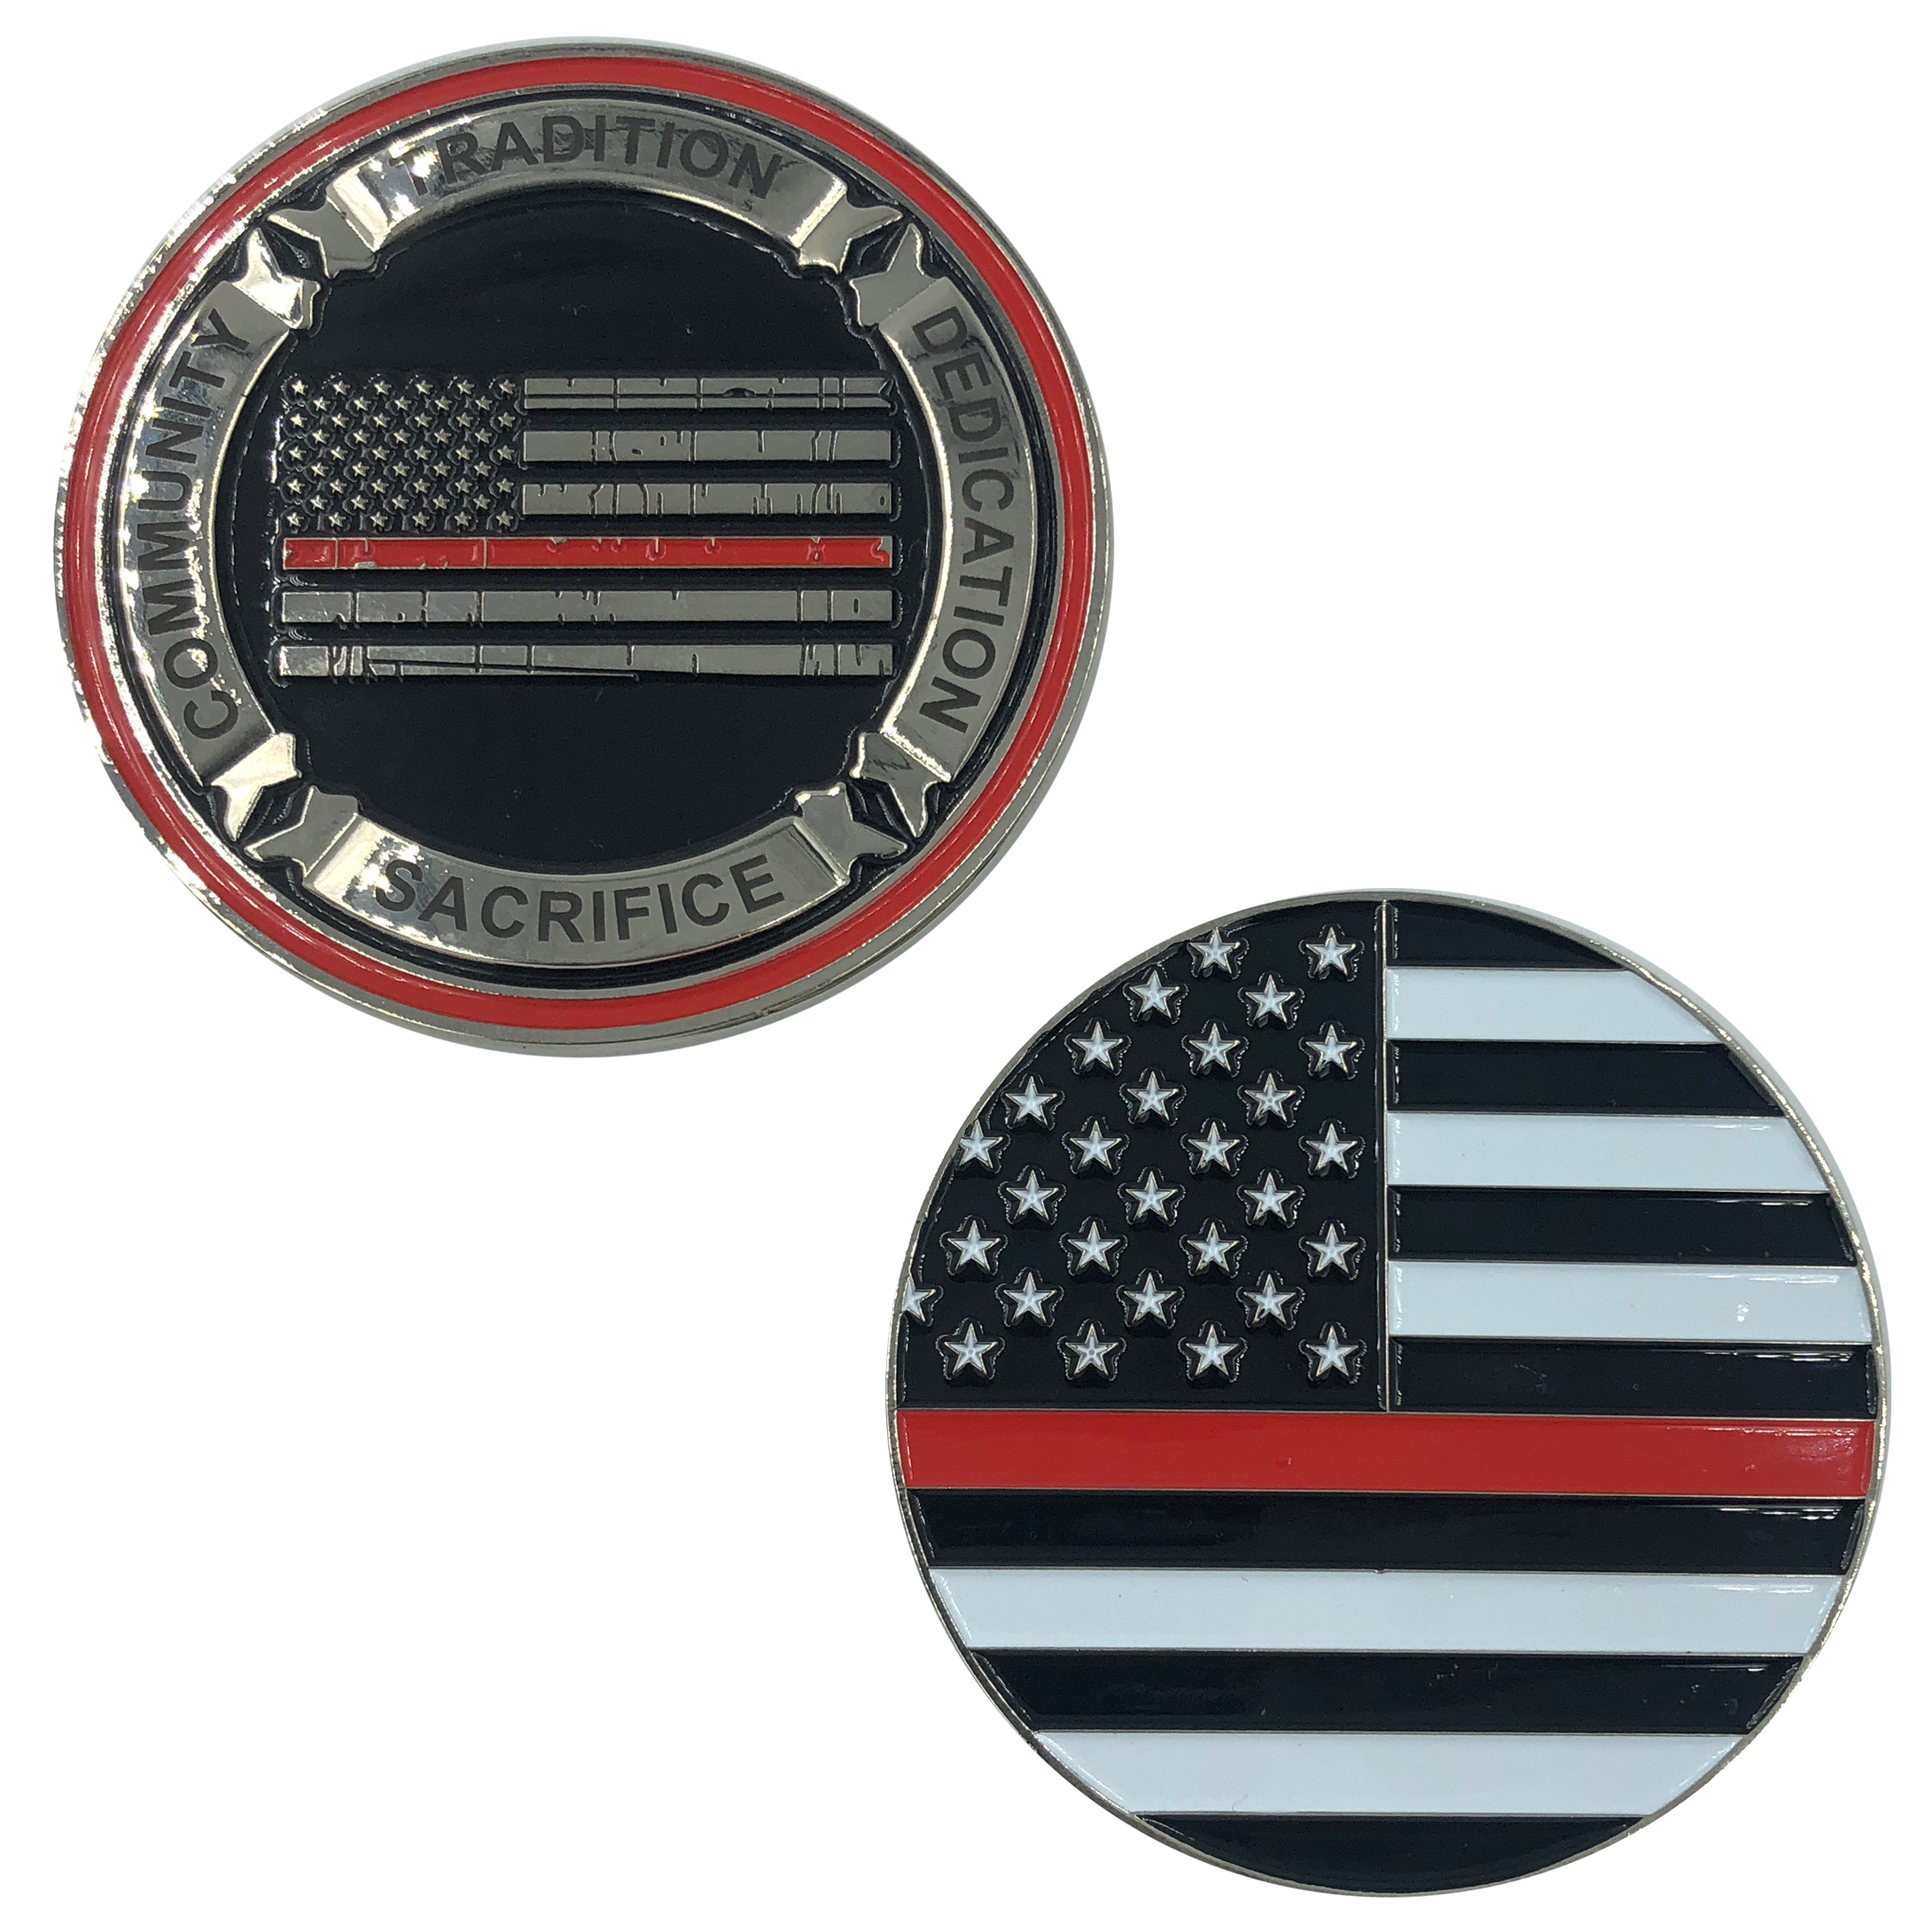 I-015 Thin Red Line Fire Fighter Core Values Challenge Coin Police Firefighter Department